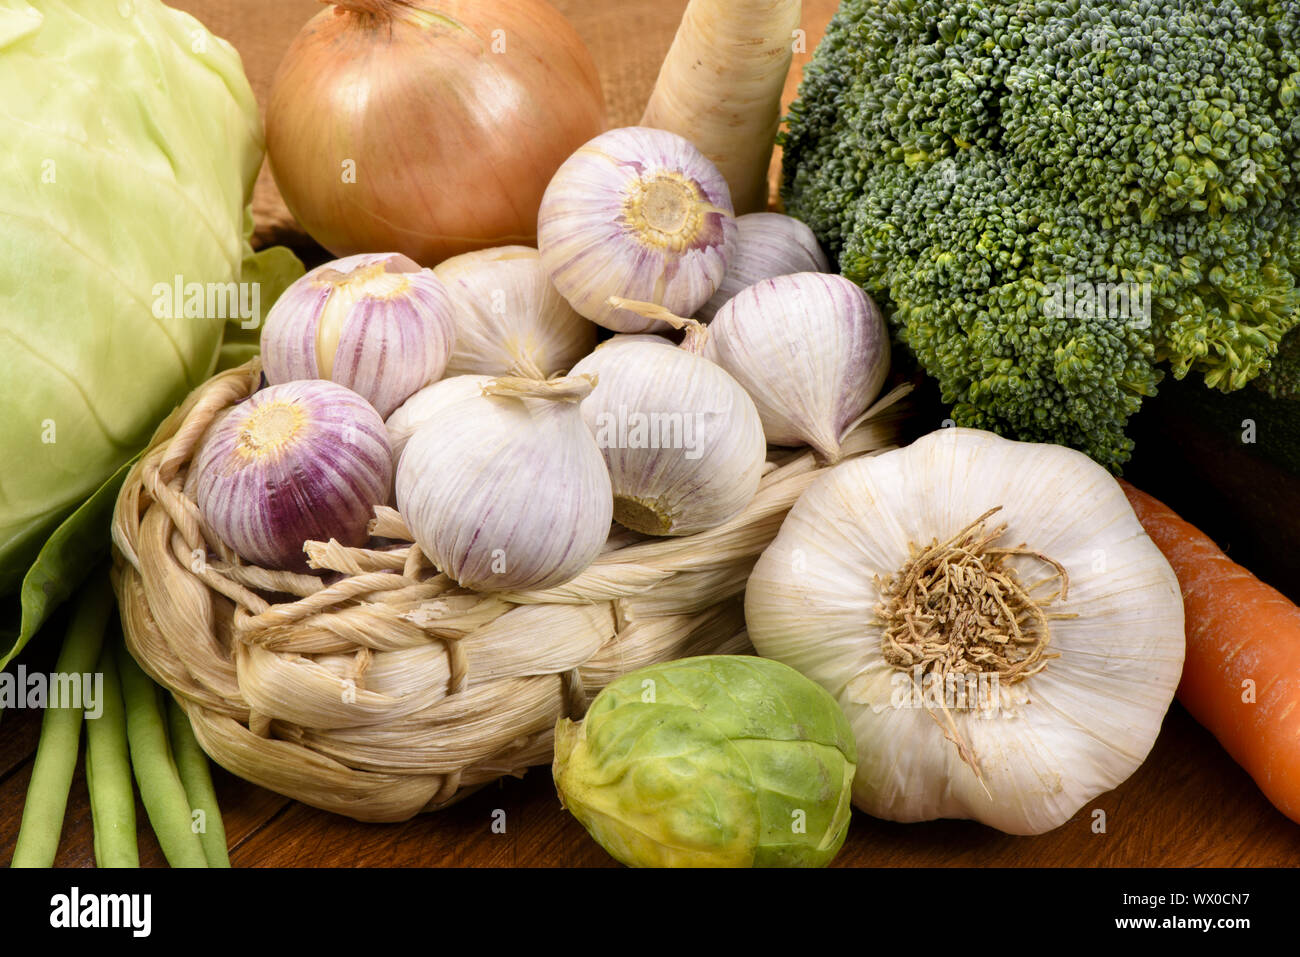 Fresh vegetables from the market Stock Photo